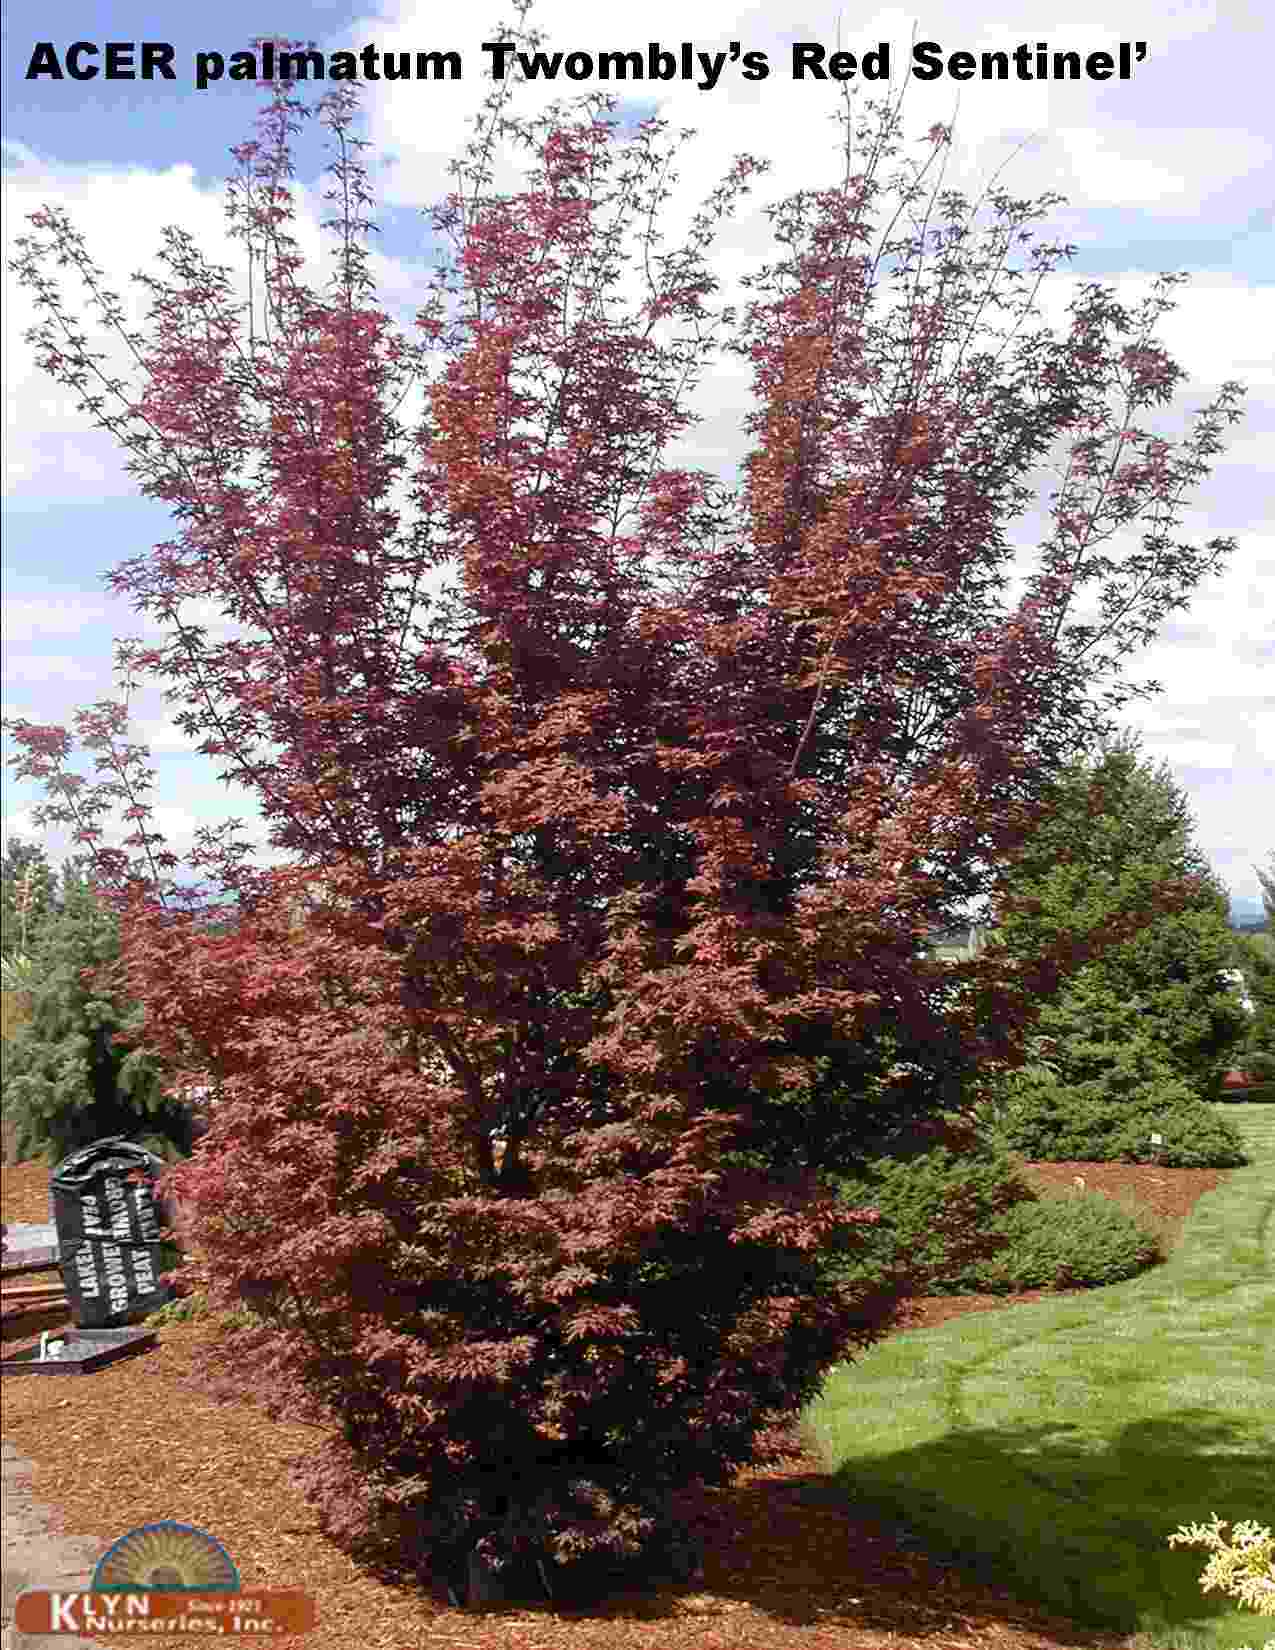 ACER palmatum ‘Twombly’s Red Sentinel’